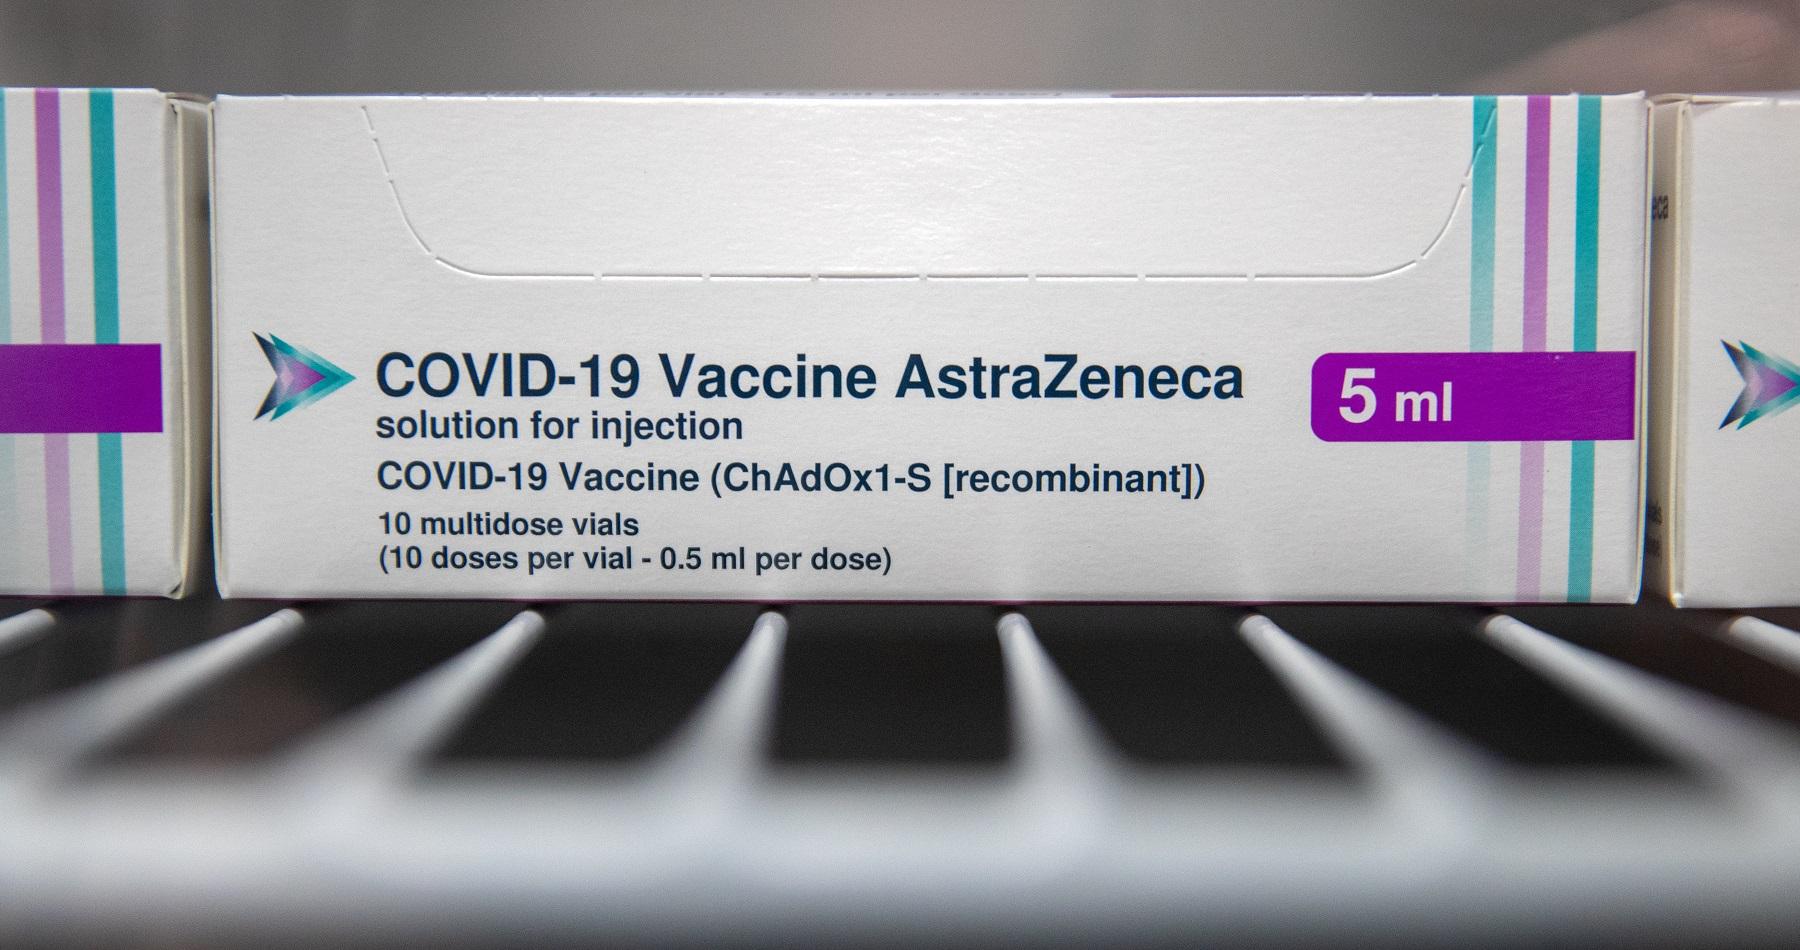 Three people in Norway treated for ‘unusual symptoms’ after AstraZeneca COVID-19 shots